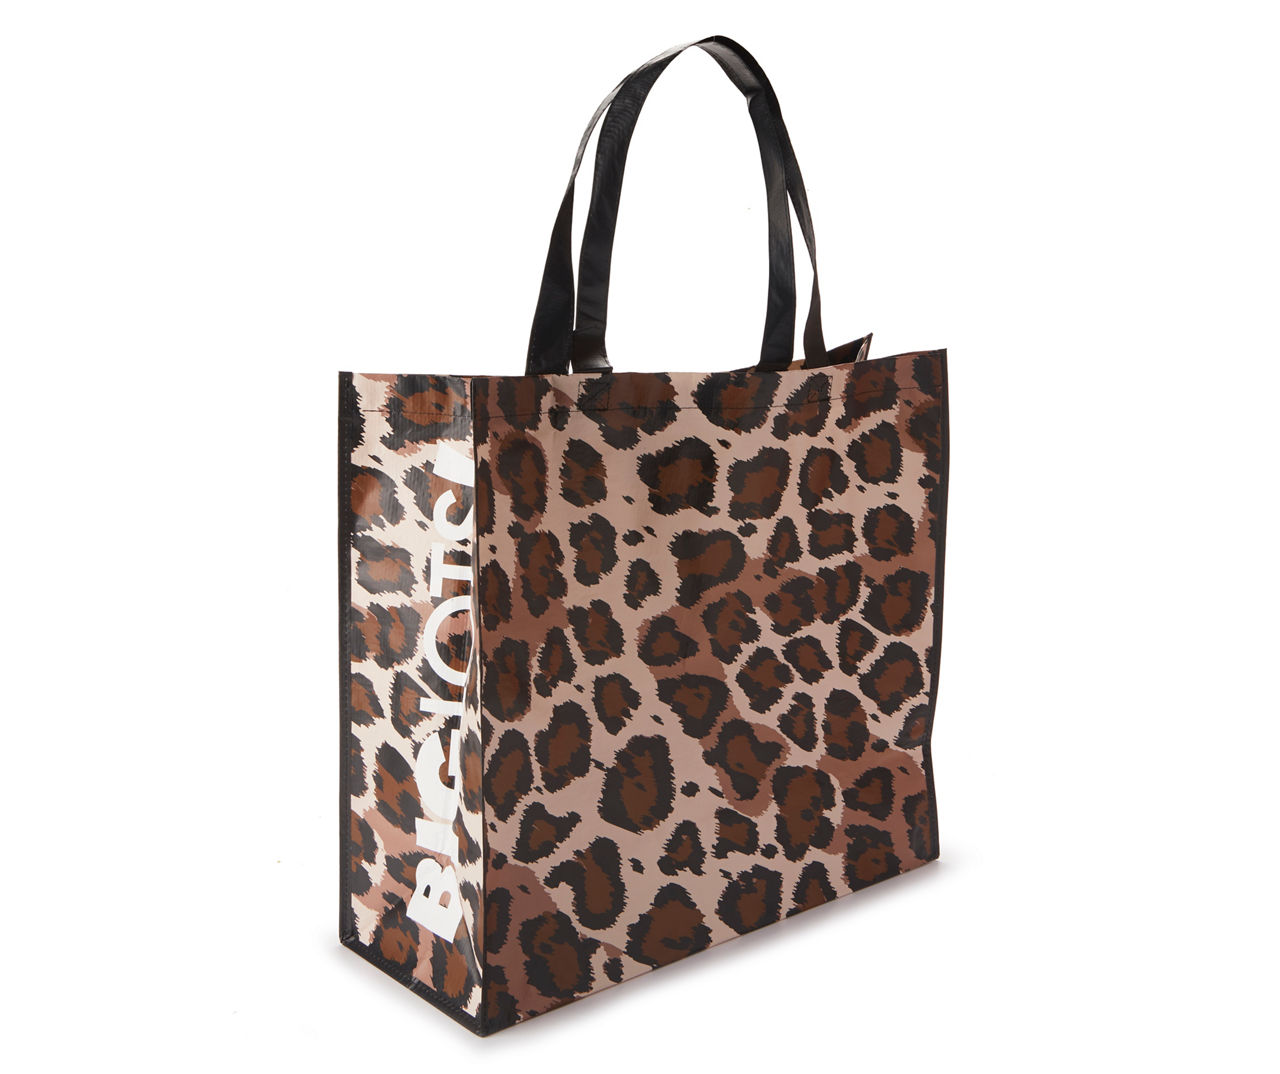 Coseey Leopard Animal Print Design Tote Bag, Size: One Size